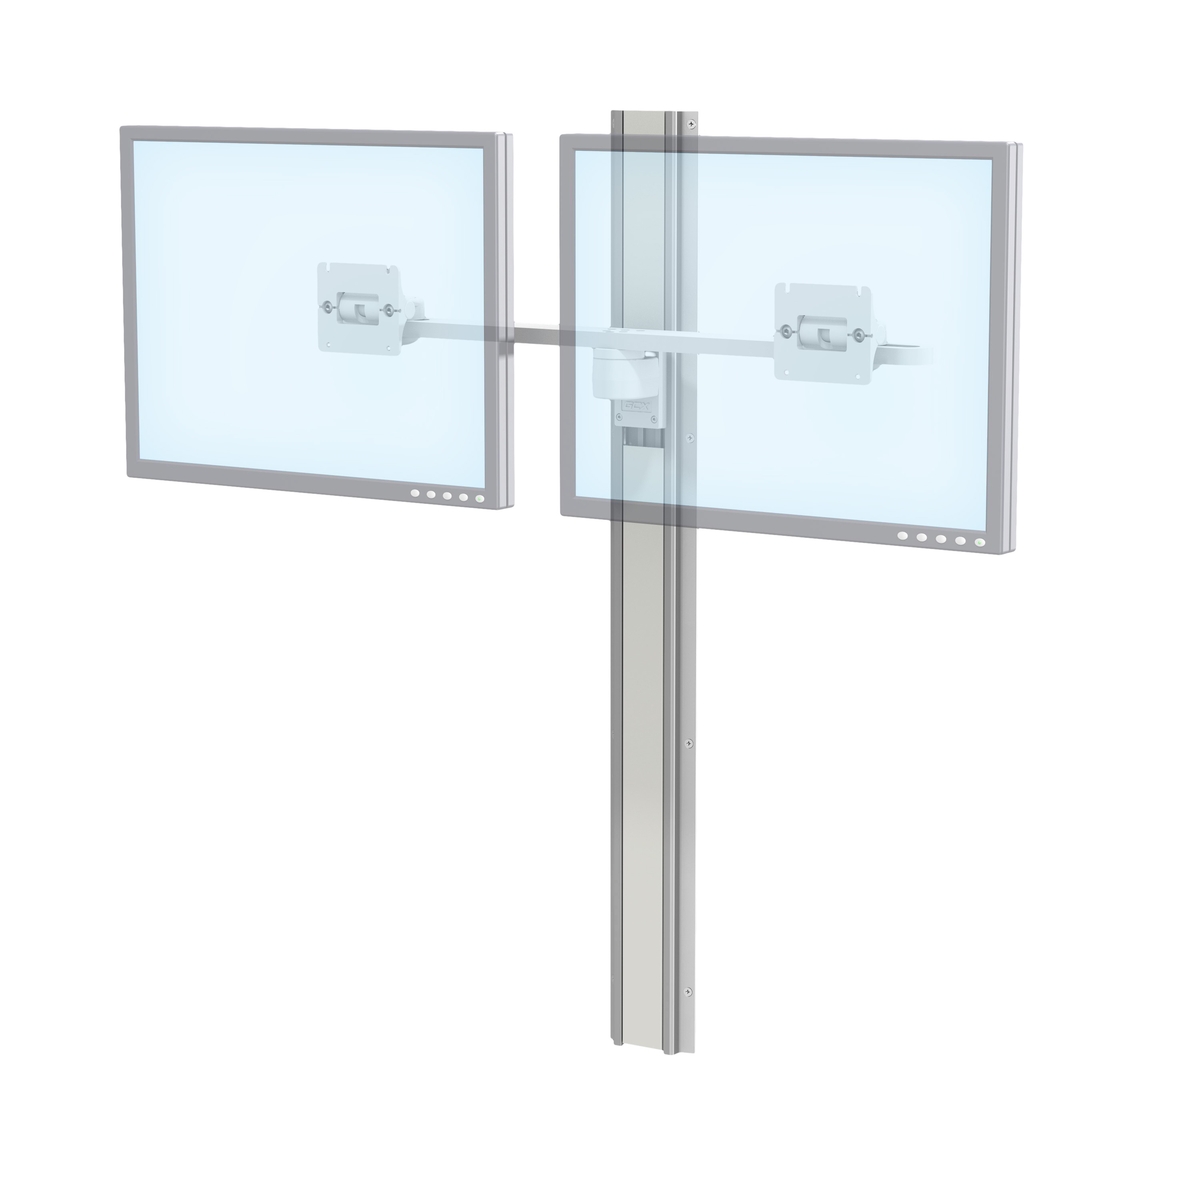 M Series Dual Monitor Mount | GCX Medical Mounting Solutions